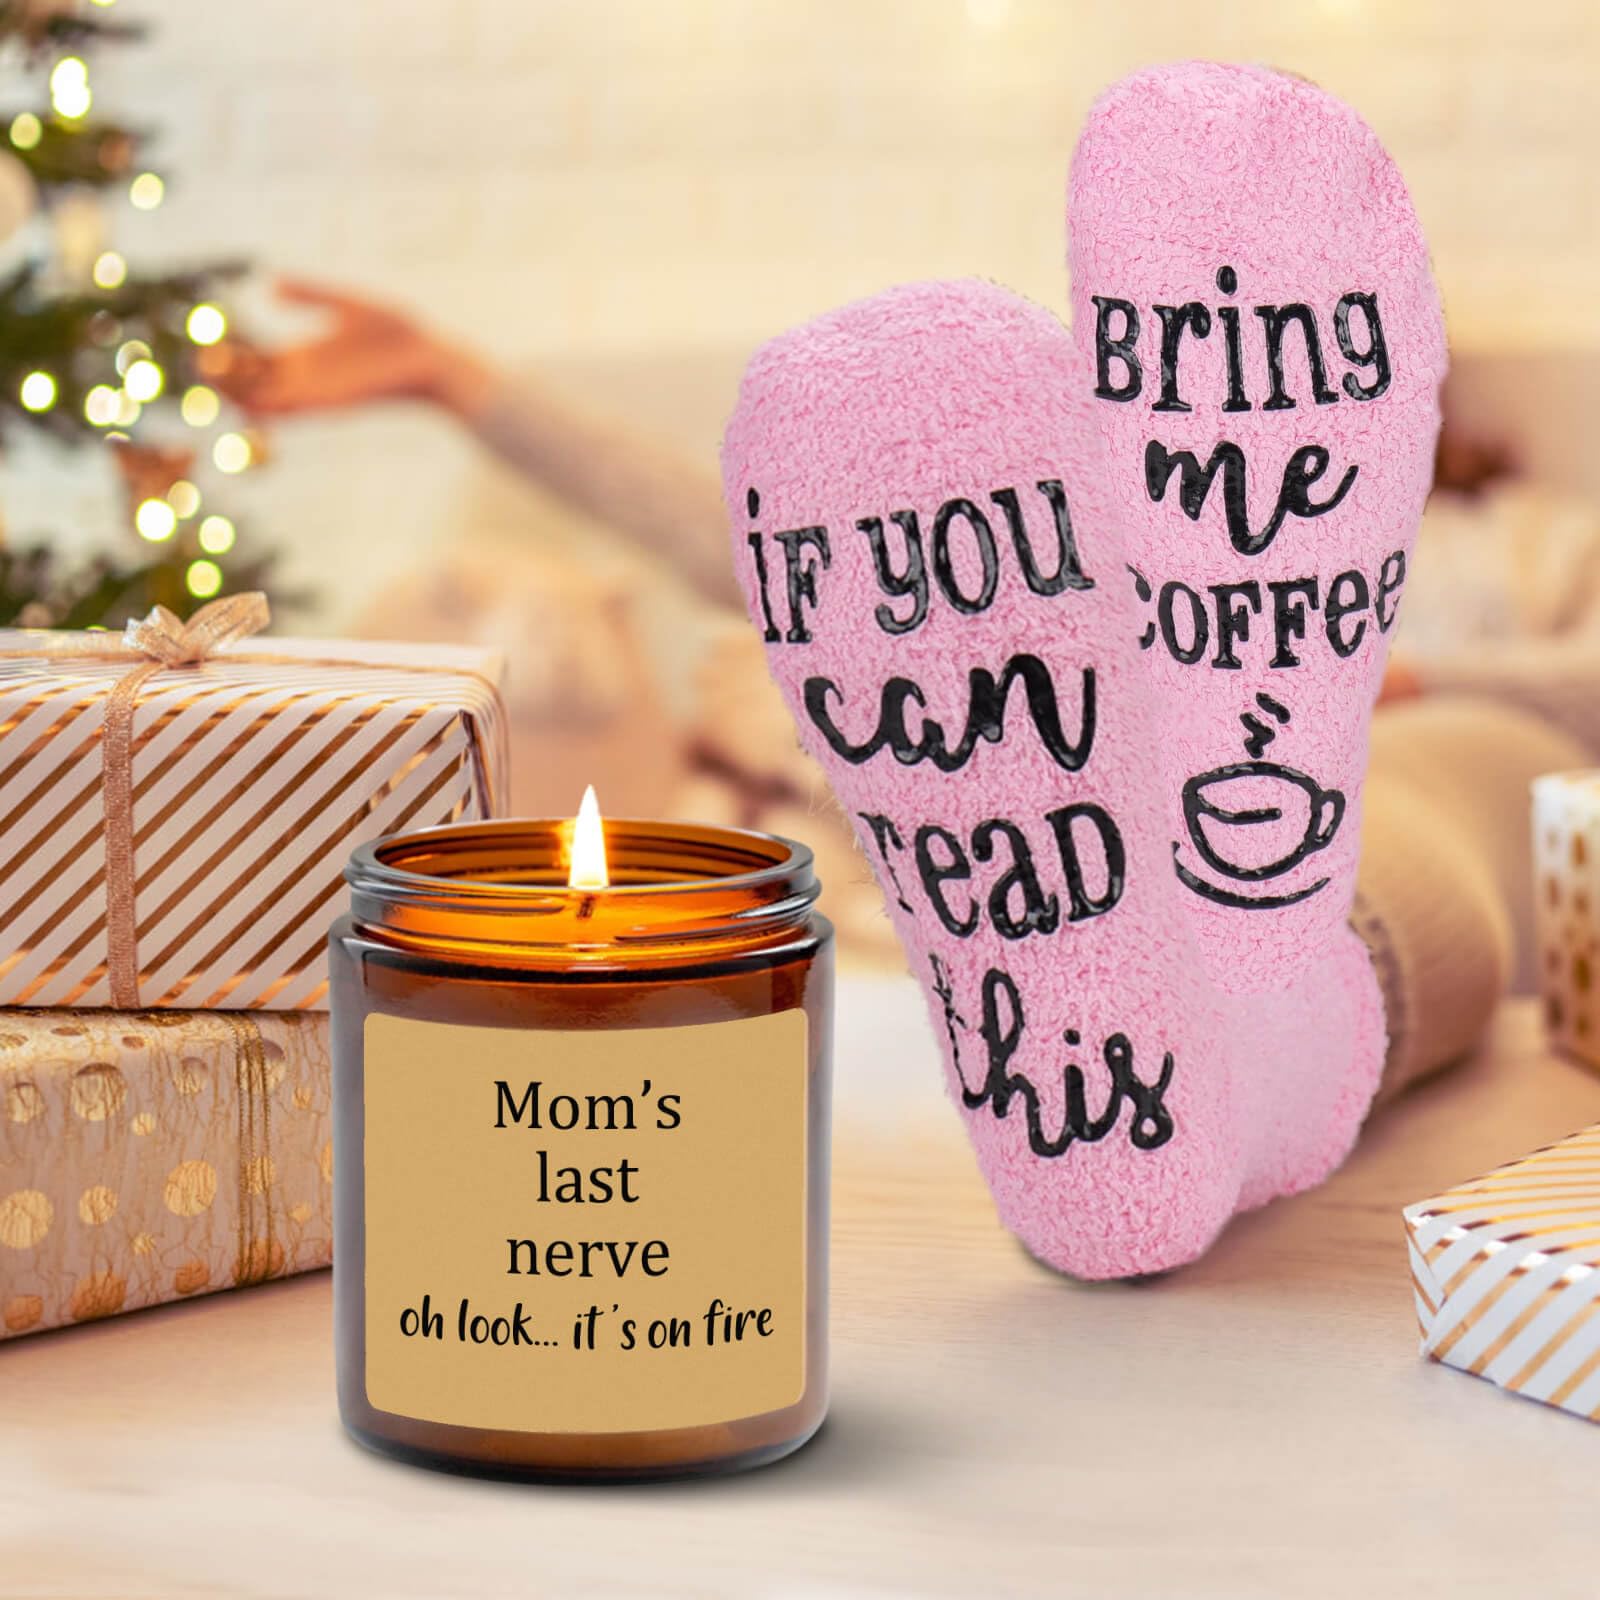 Ithmahco Mom Gifts, Mom Birthday Gifts, Gifts For Mom, Mom Birthday Gifts From Daughter, Gifts For Mom Birthday, Moms Birthday Gift Ideas, Birthday Gifts For Mom From Daughter, Mom Gifts From Son